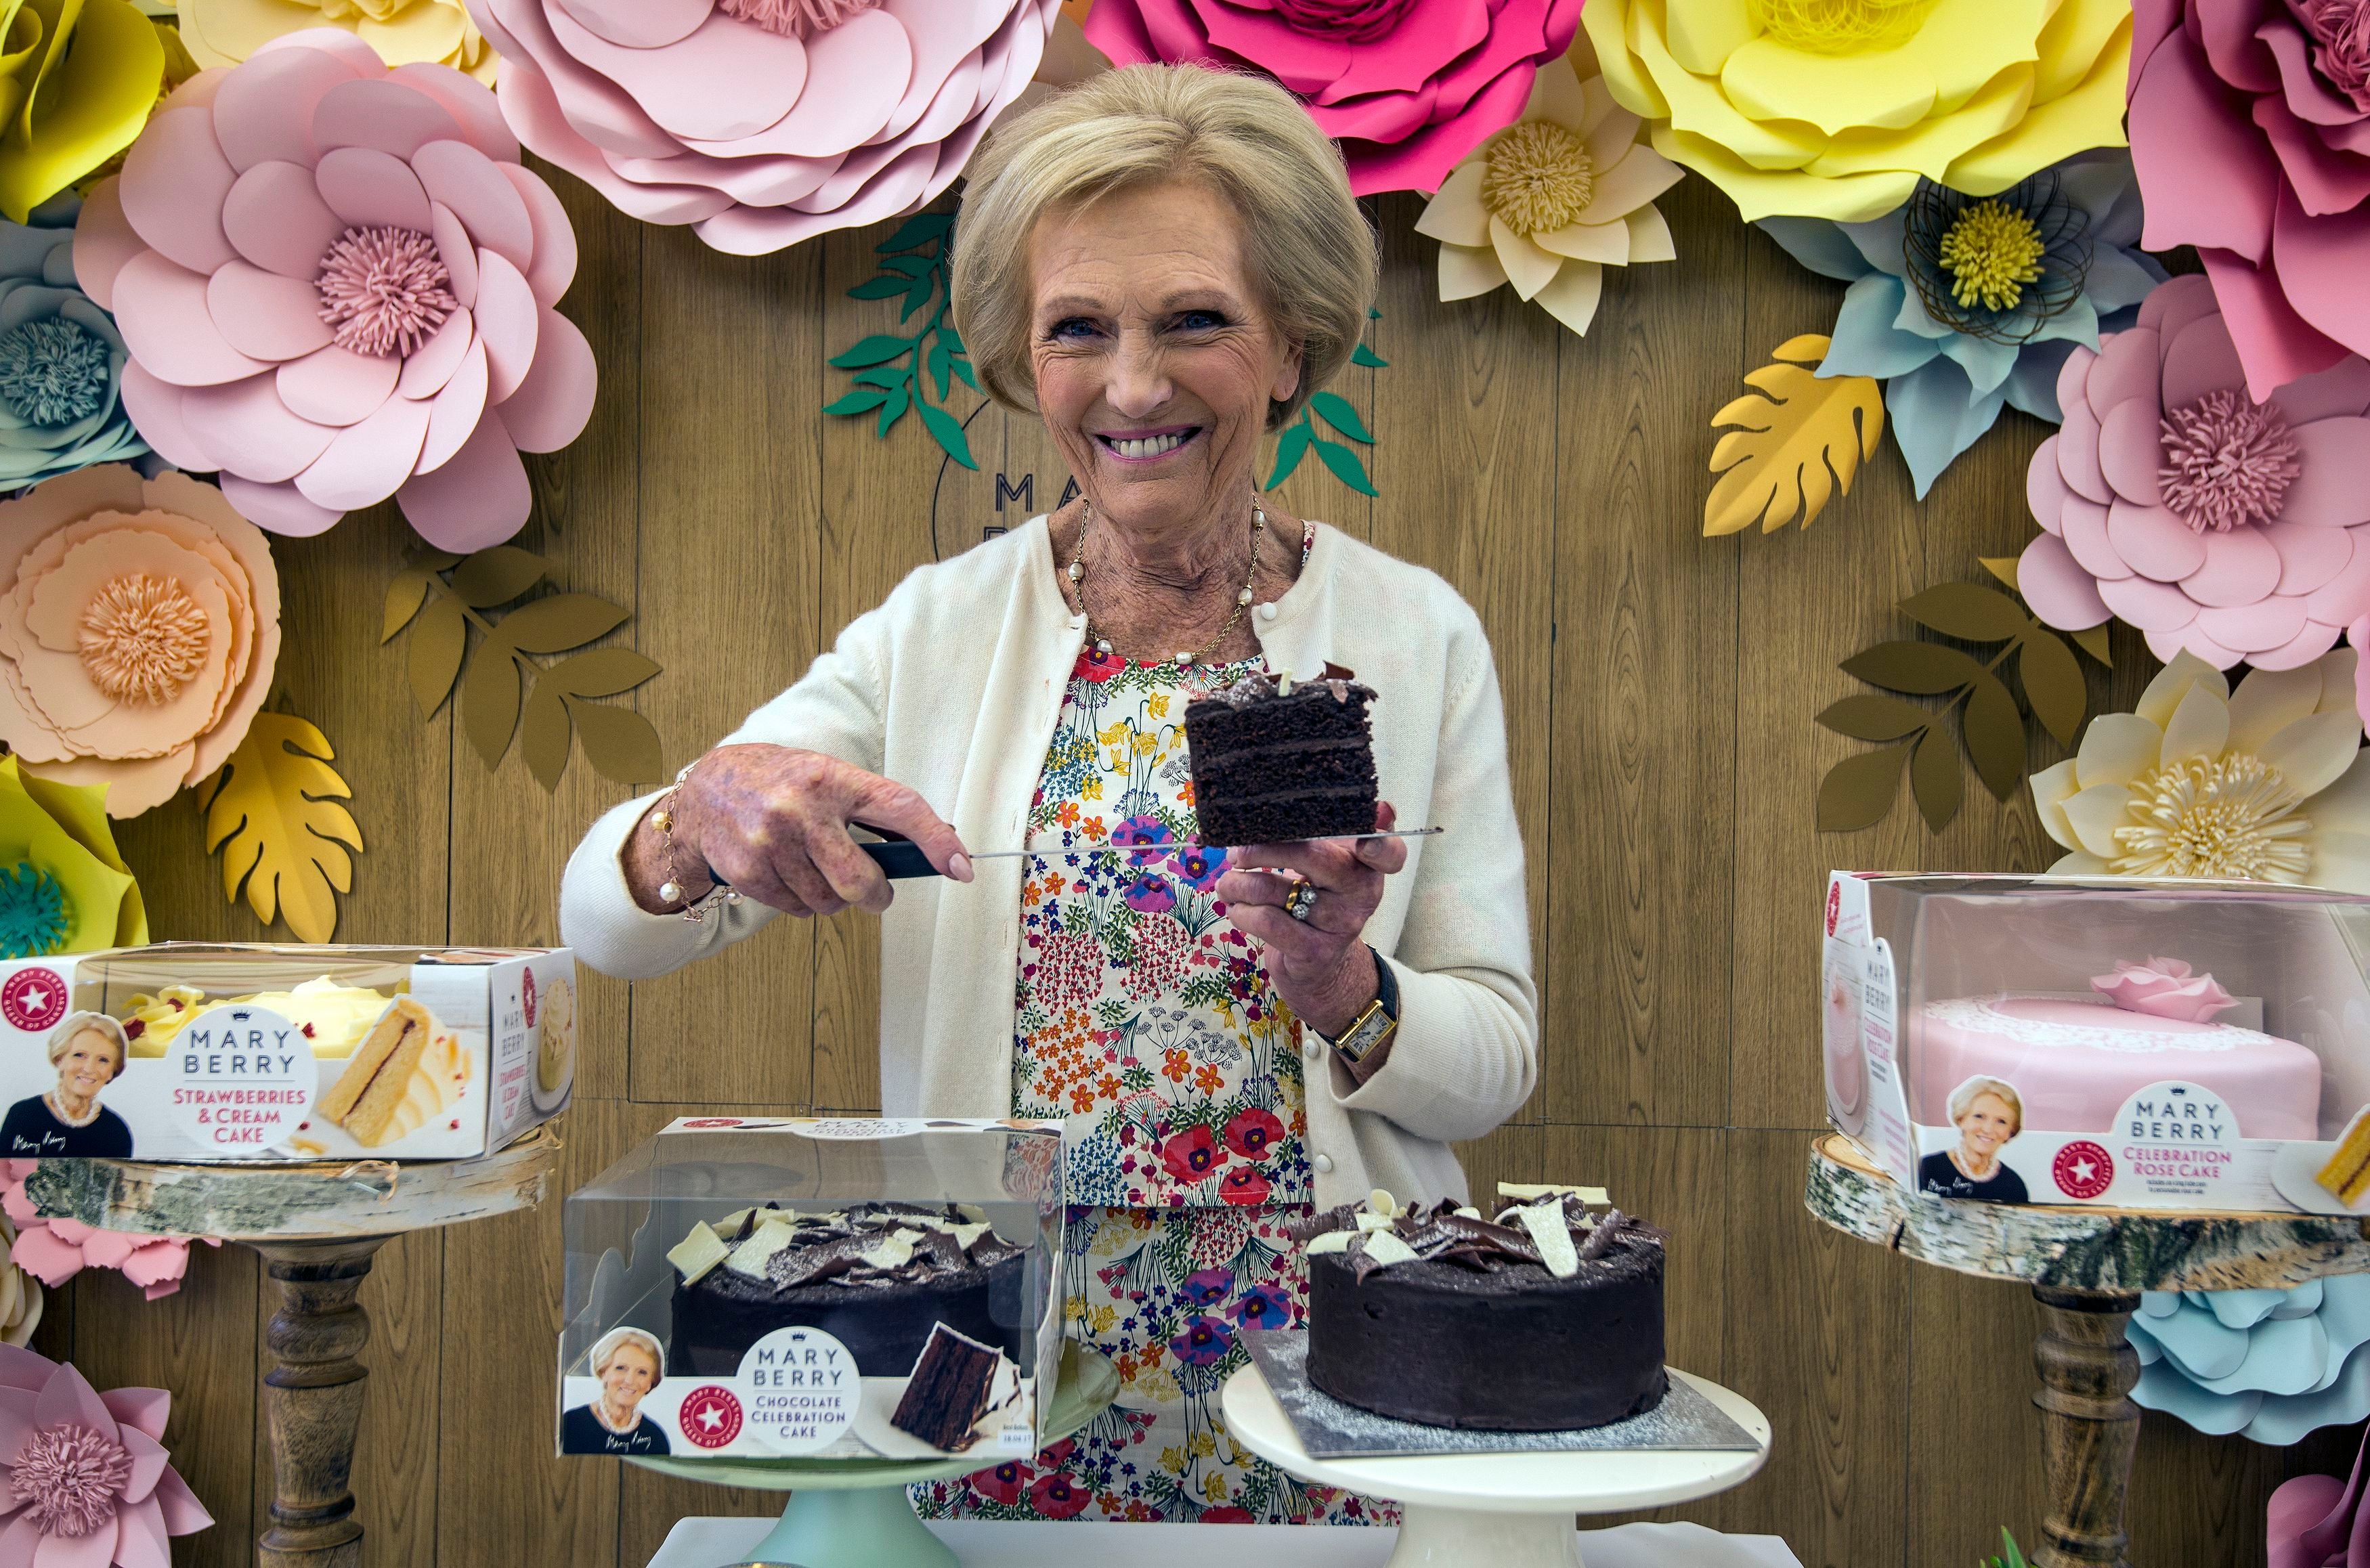 Mary Berry launched a range of cakes with Finsbury Food (Lauren Hurley/PA)